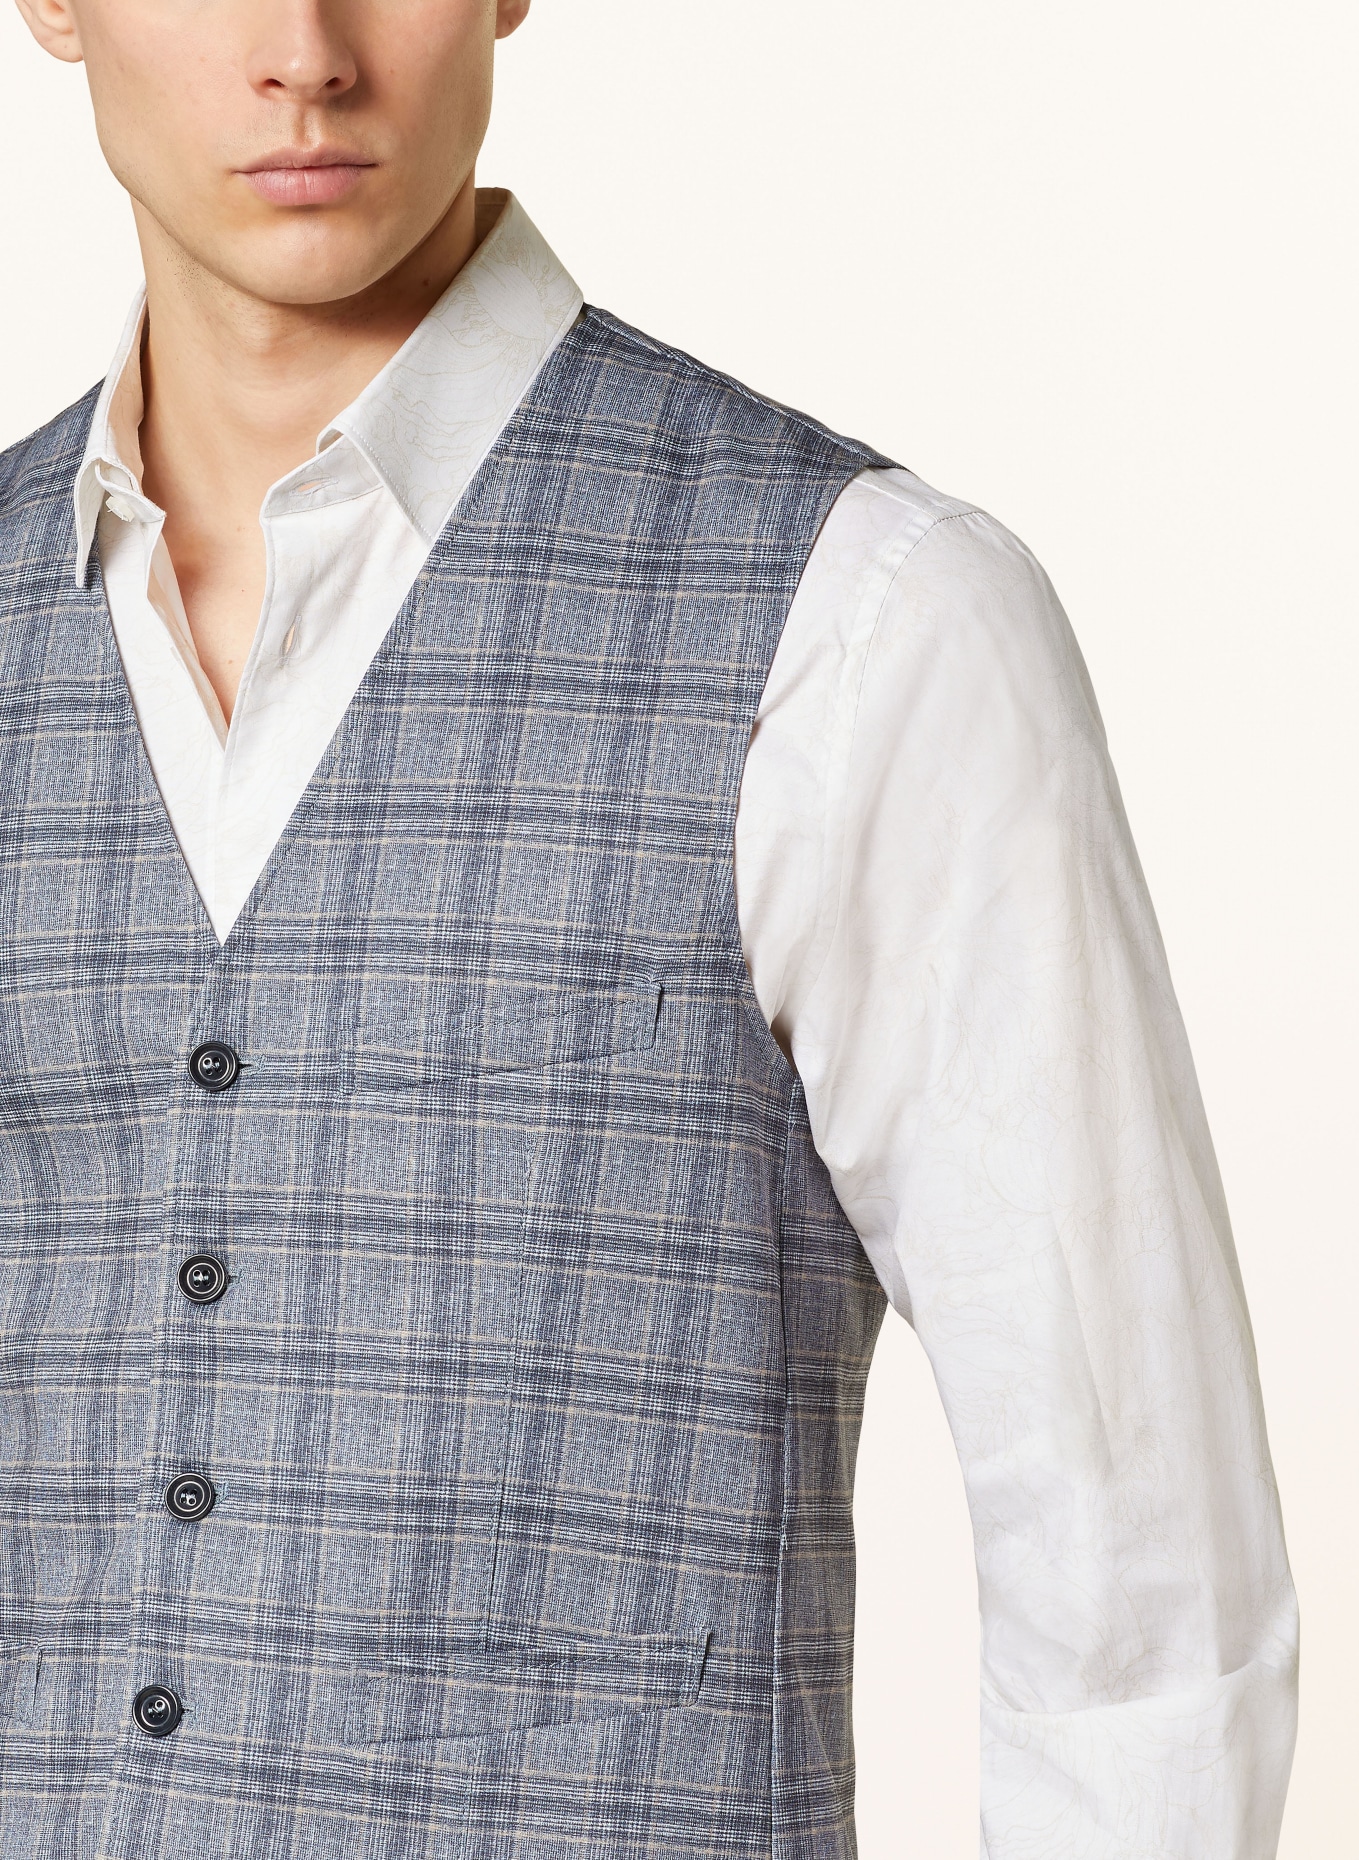 CG - CLUB of GENTS Suit vest CG MOSLEY extra slim fit in jersey, Color: 81 HELLGRAU (Image 5)